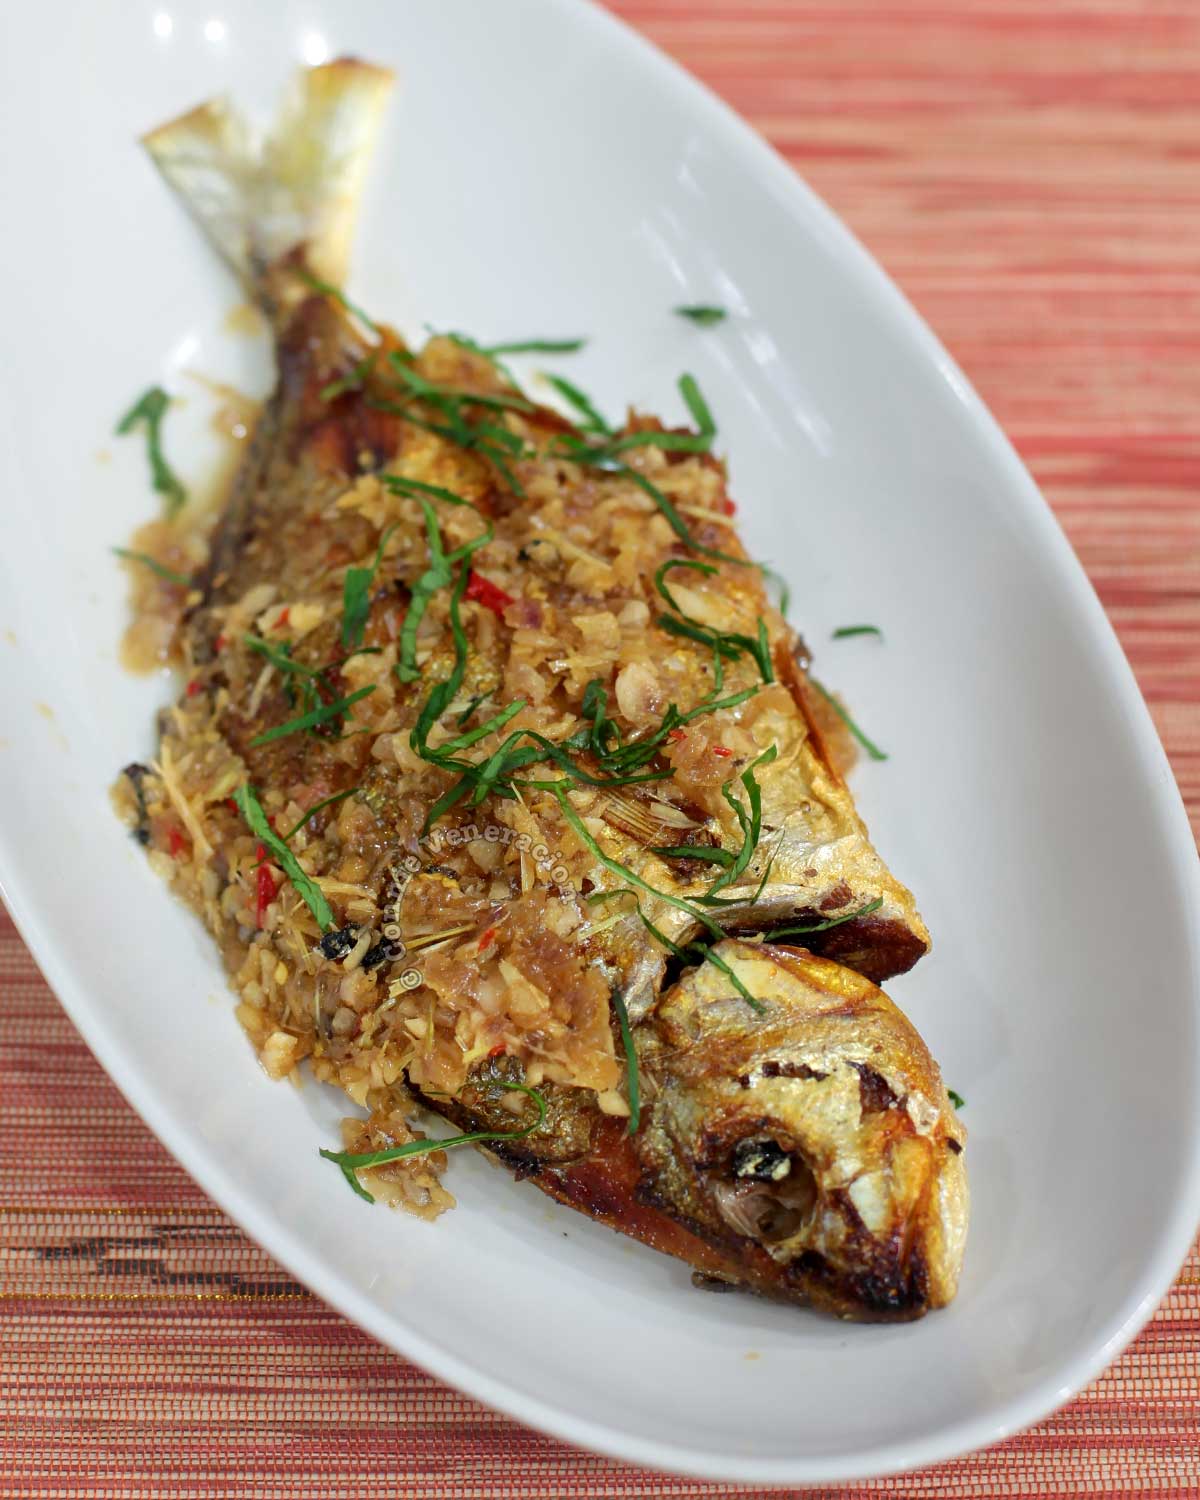 Whole fish with lemongrass and ginger sauce